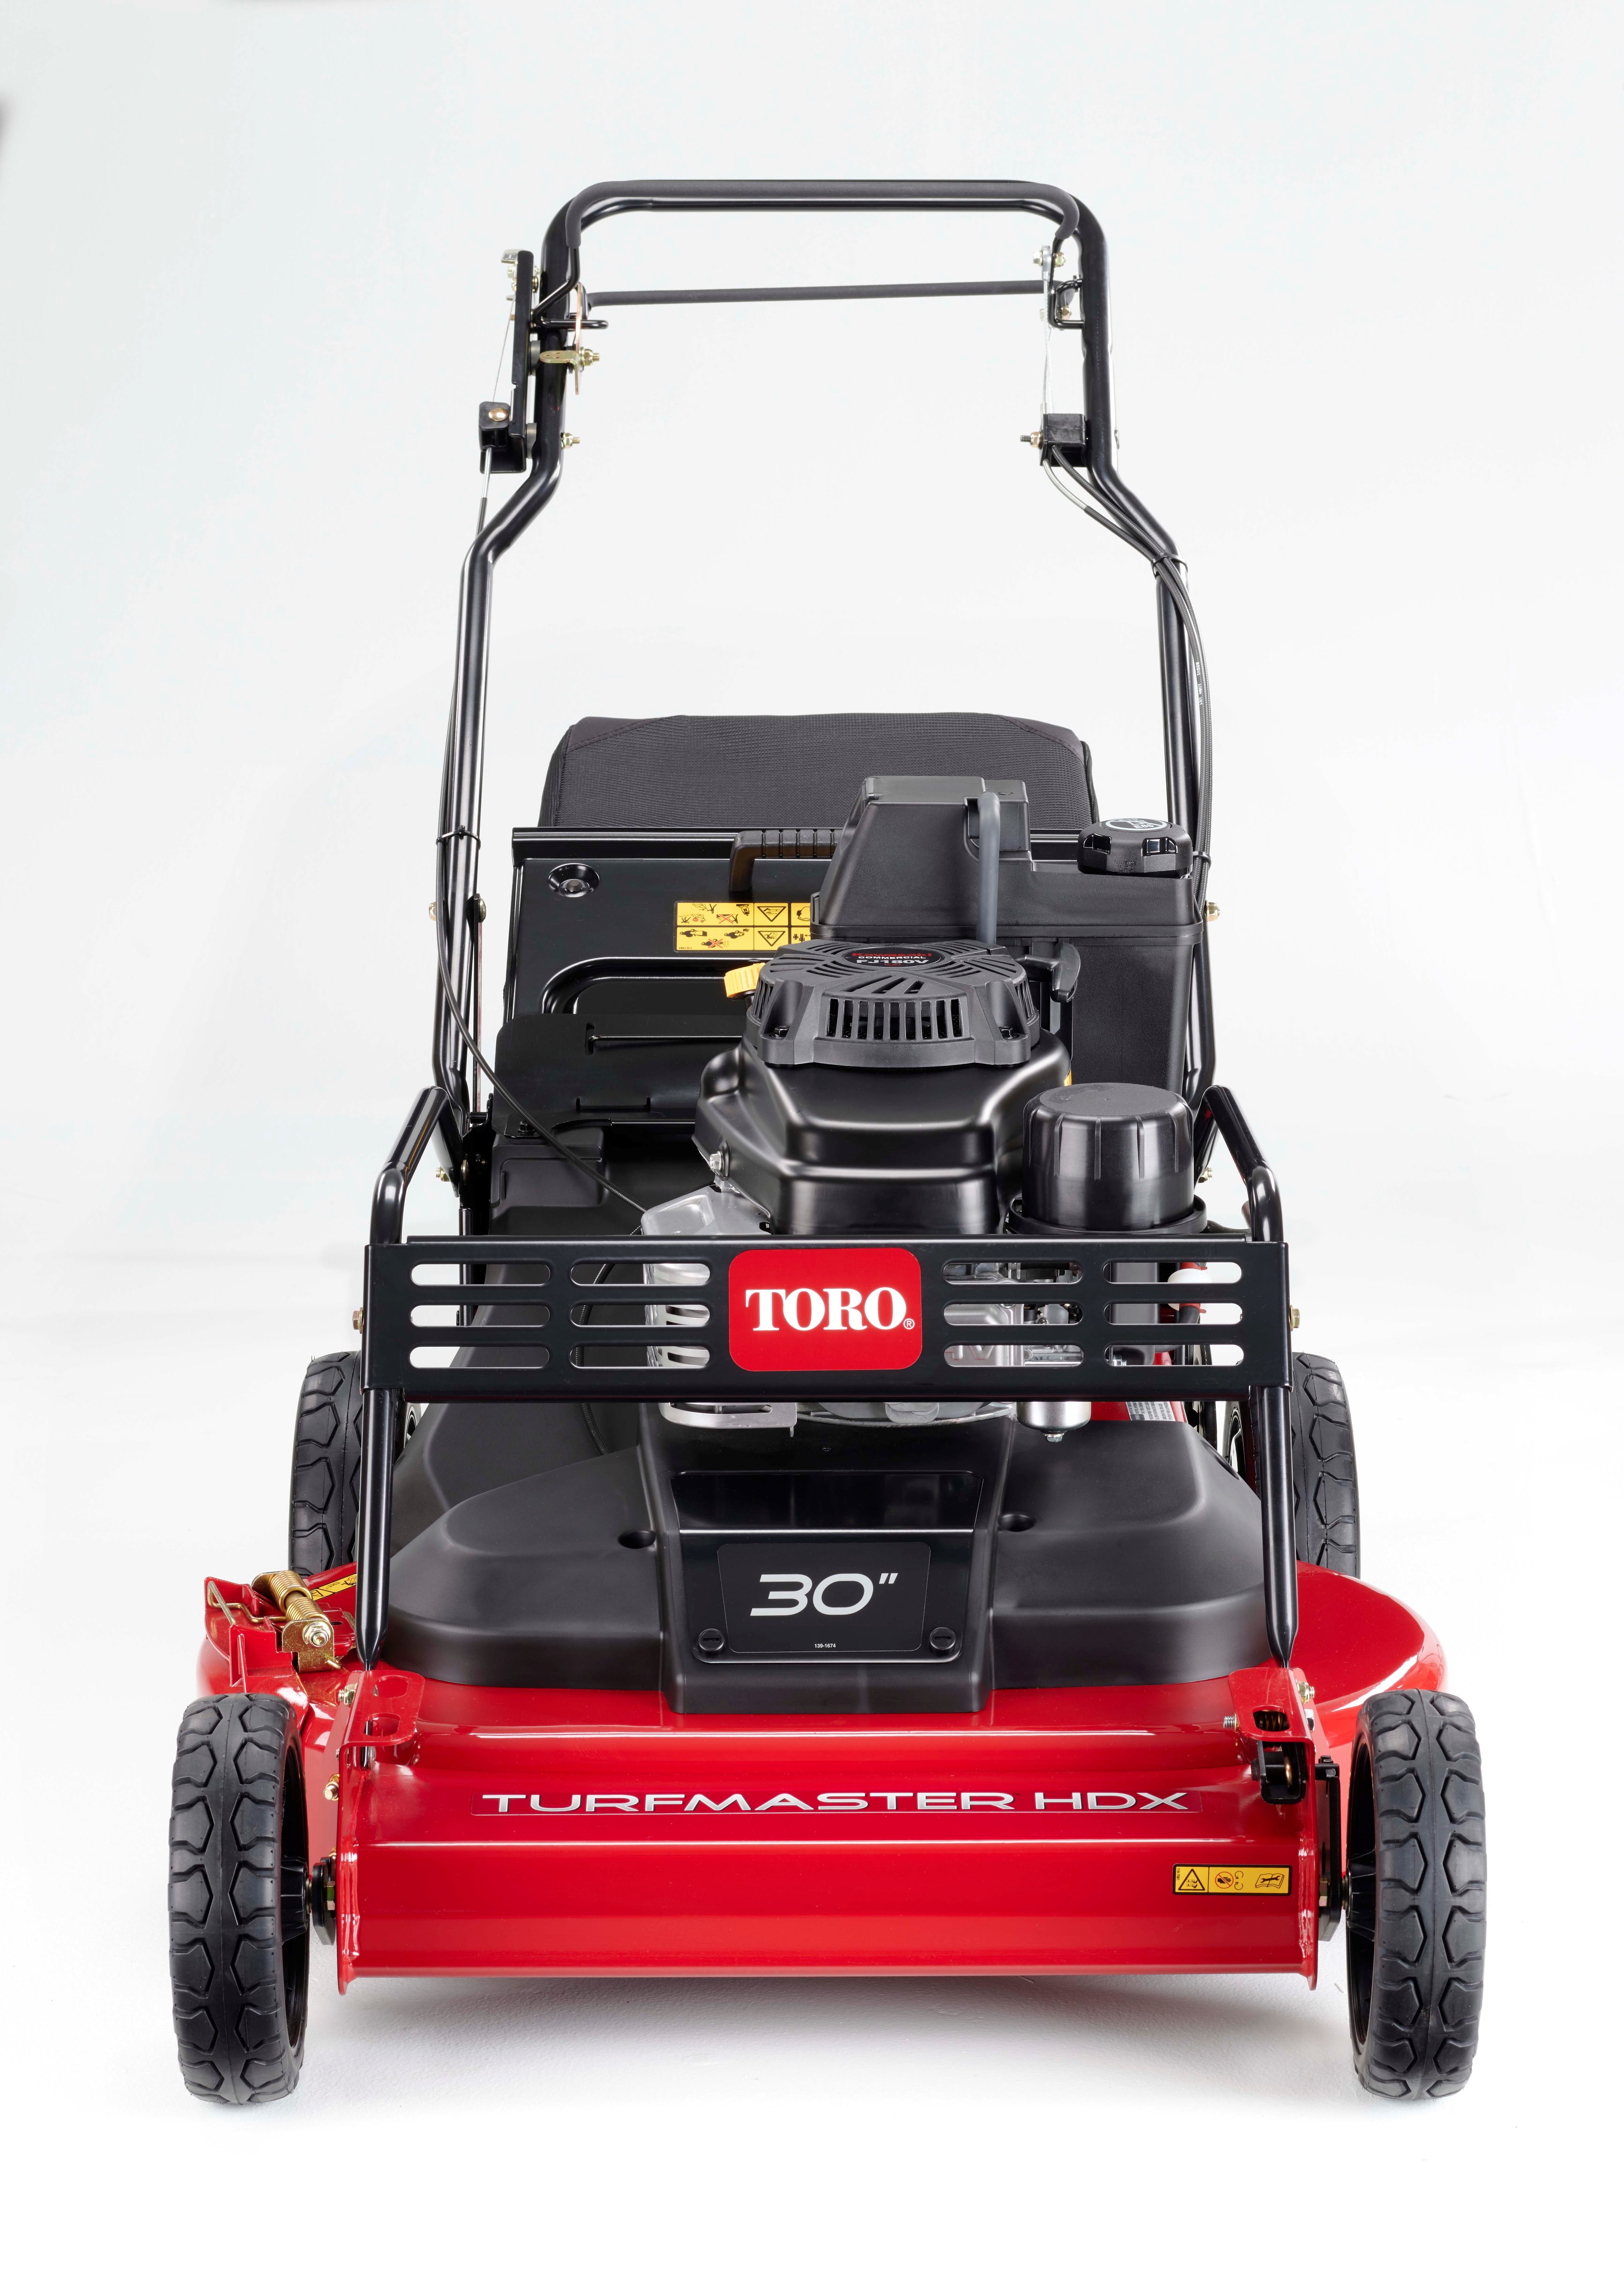 The new Toro TurfMaster™ HDX Commercial 30 Inch Mower